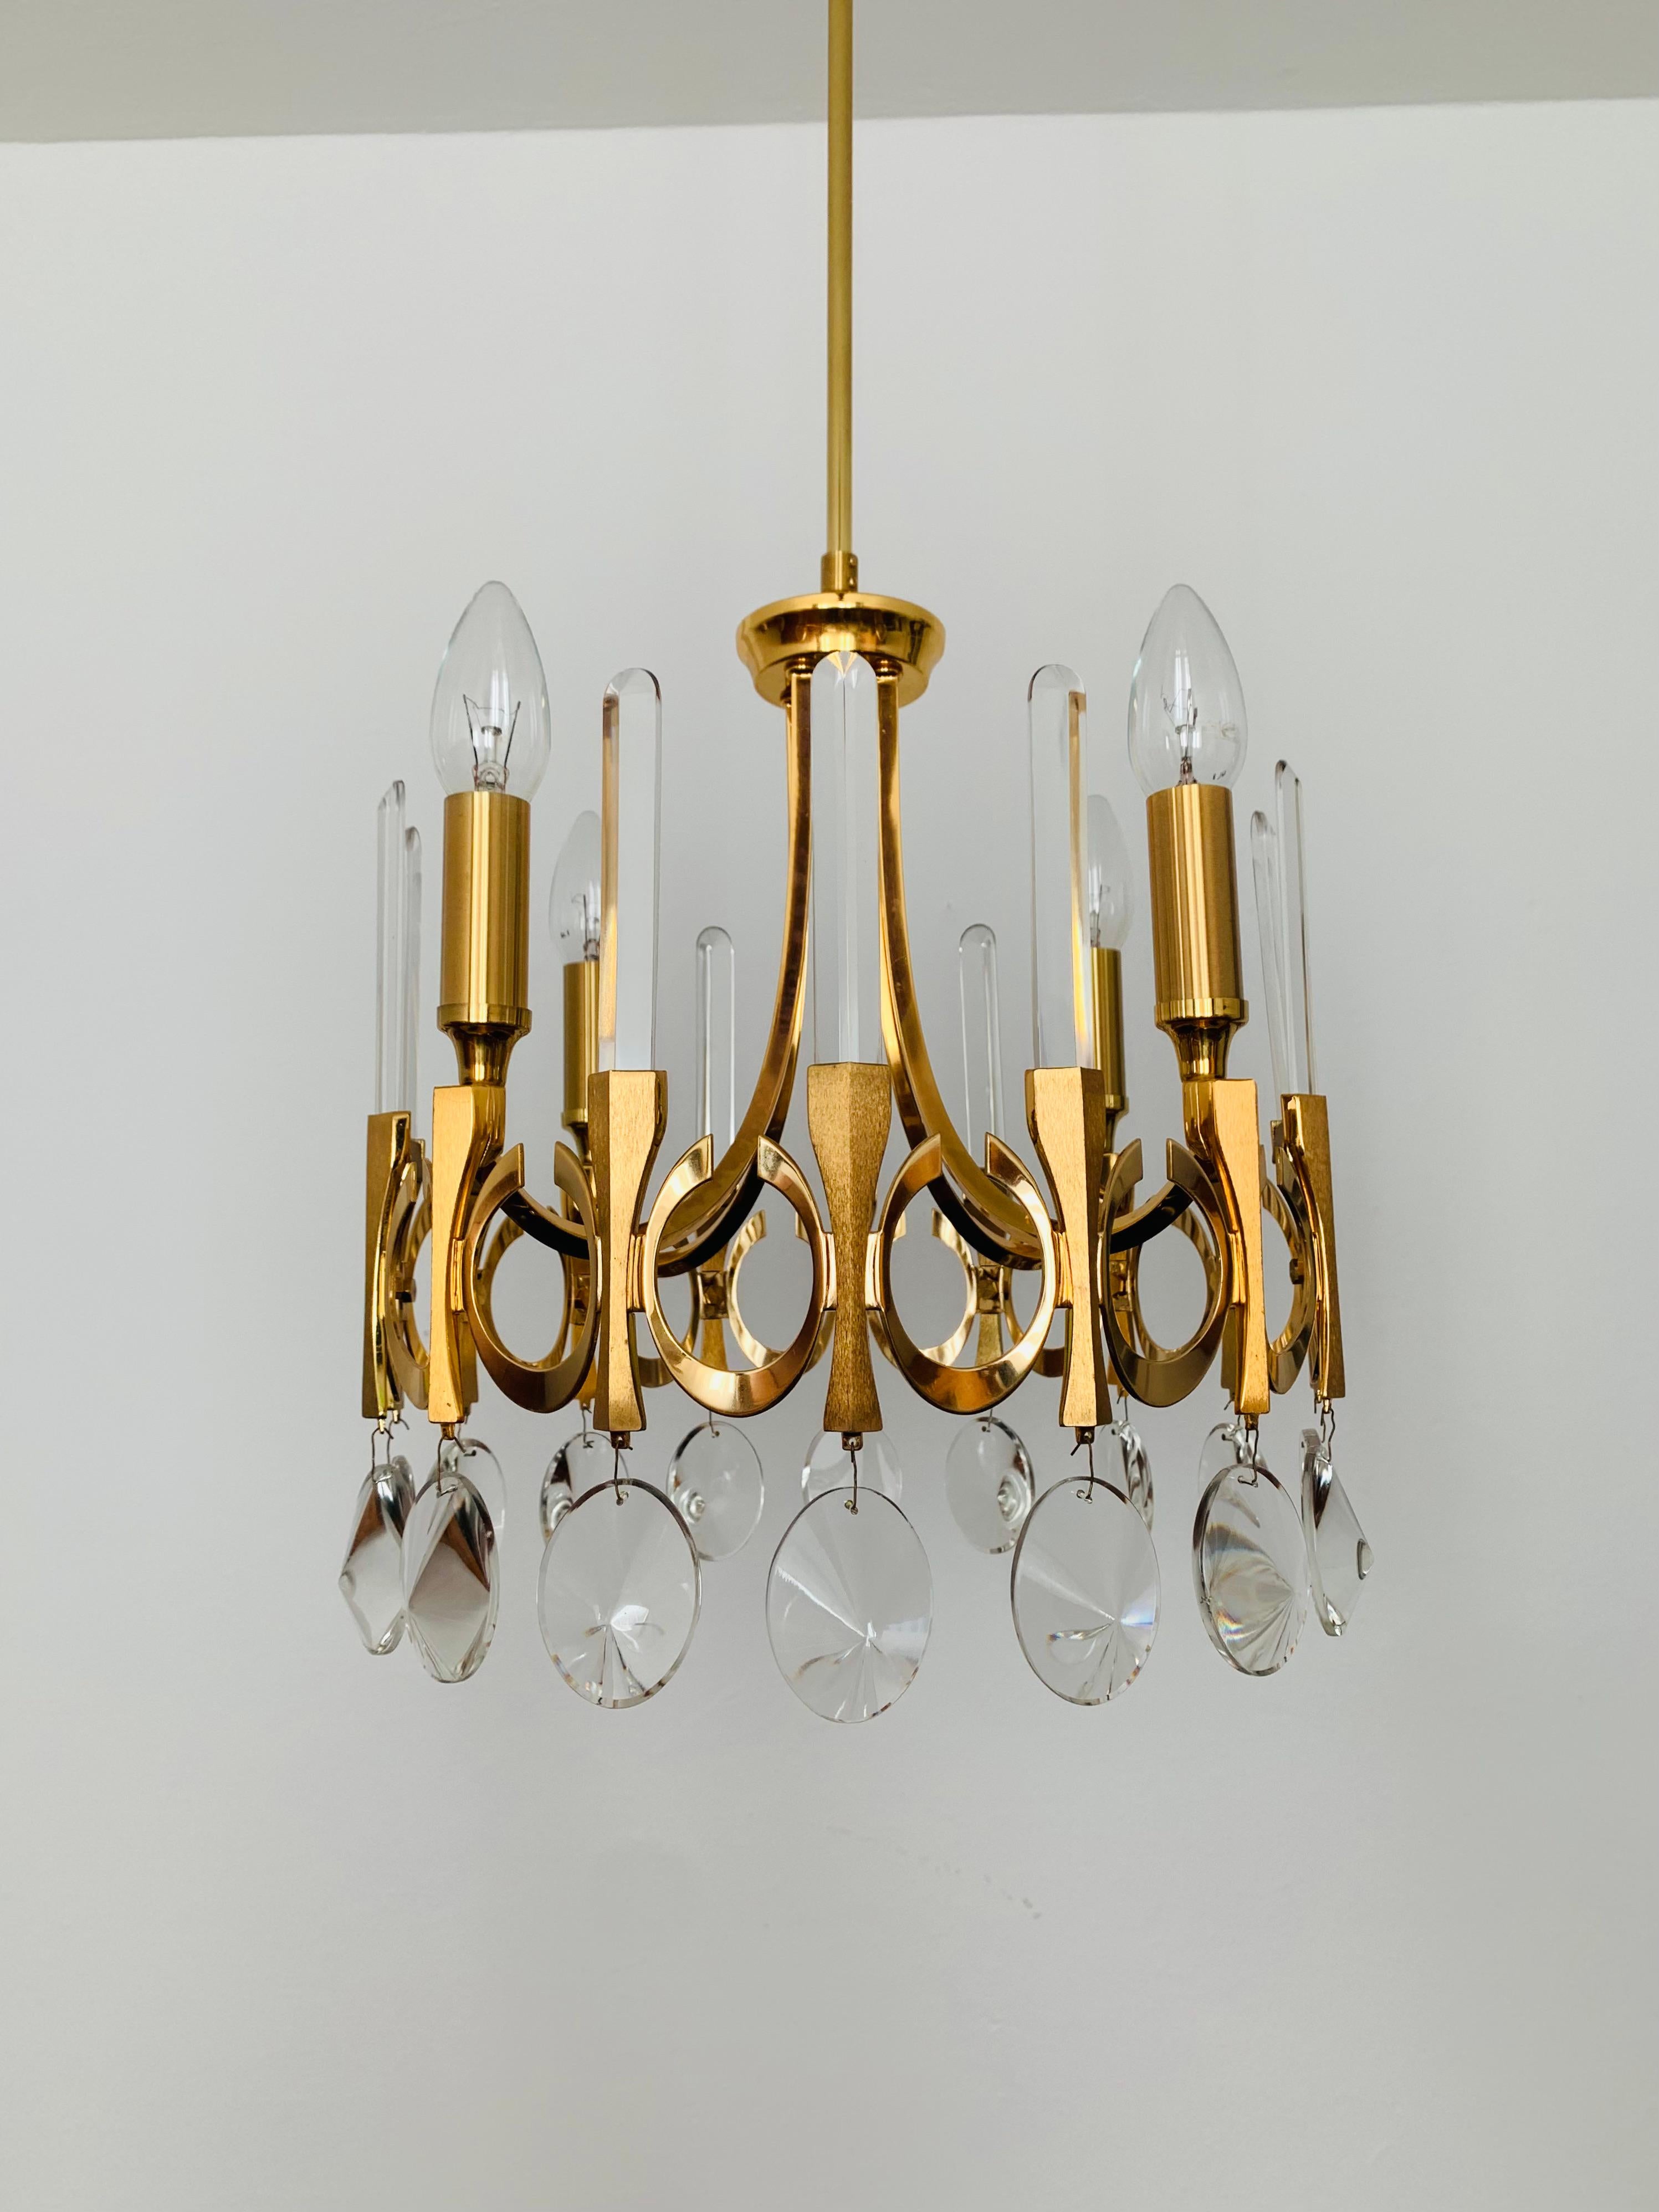 Wonderful brutalist crystal glass chandelier from the 1960s.
Extremely successful Italian design.
A very pleasant and sparkling light is created.

Design: Gaetano Sciolari

Condition:

Very good vintage condition with slight signs of wear consistent